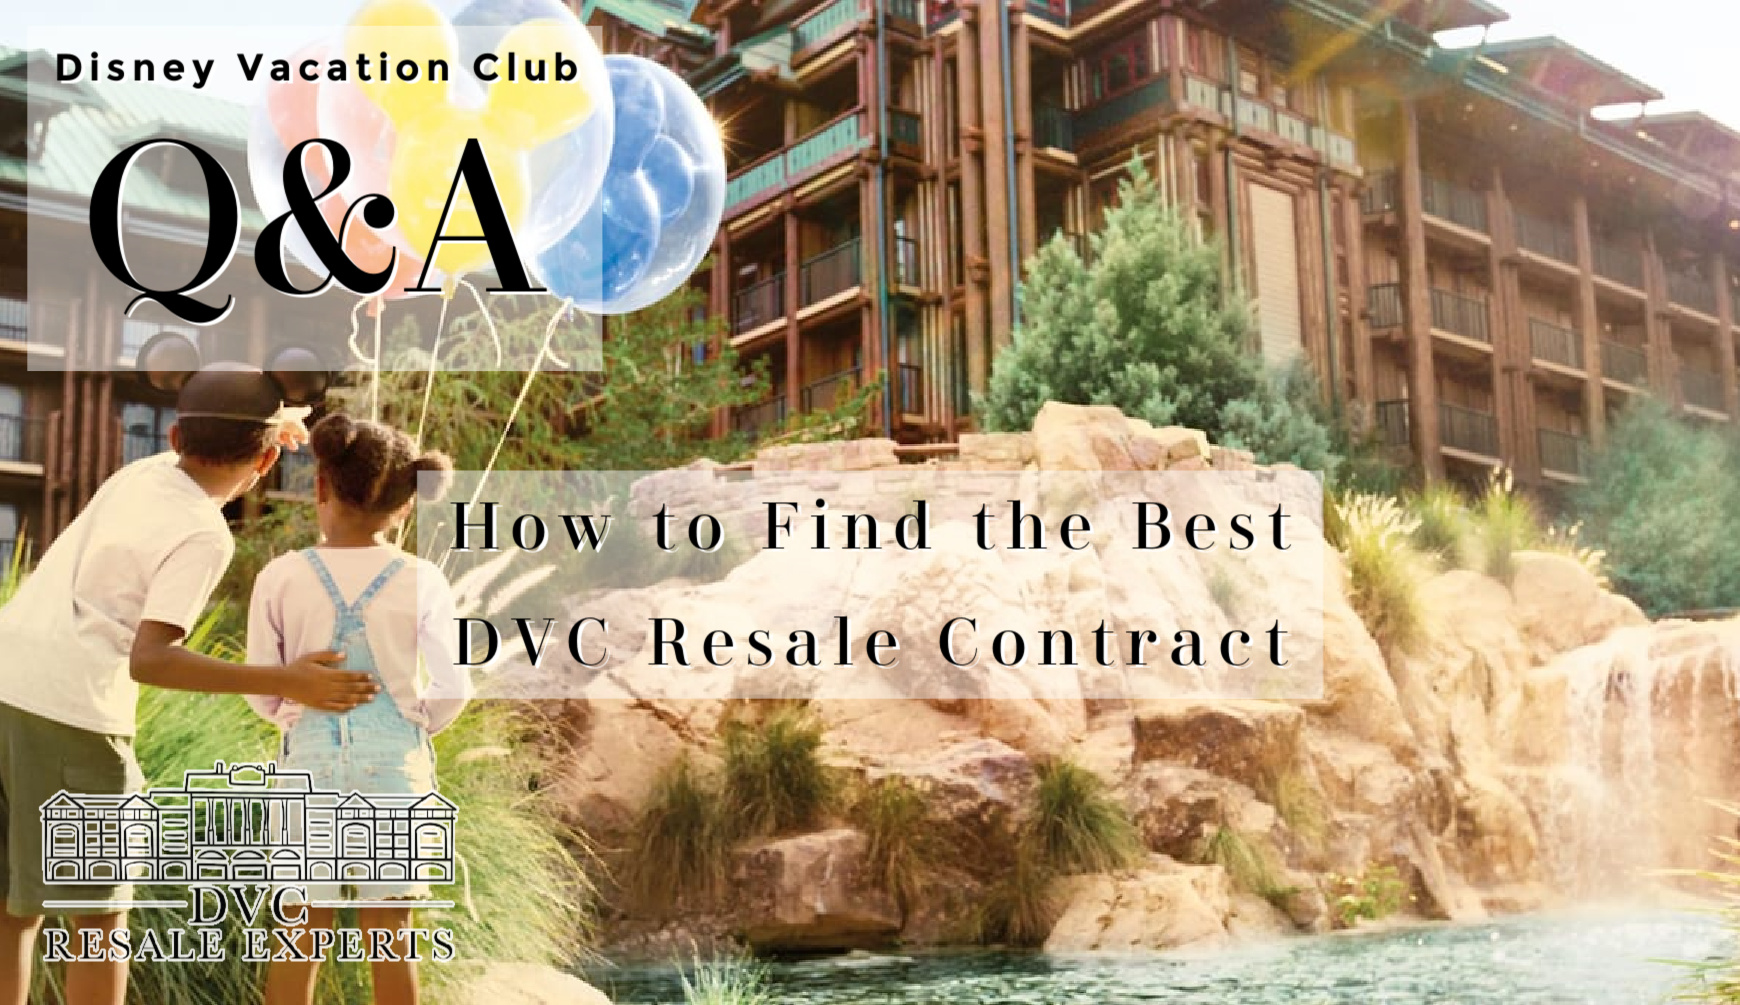 How to Find the Best DVC Resale Contract